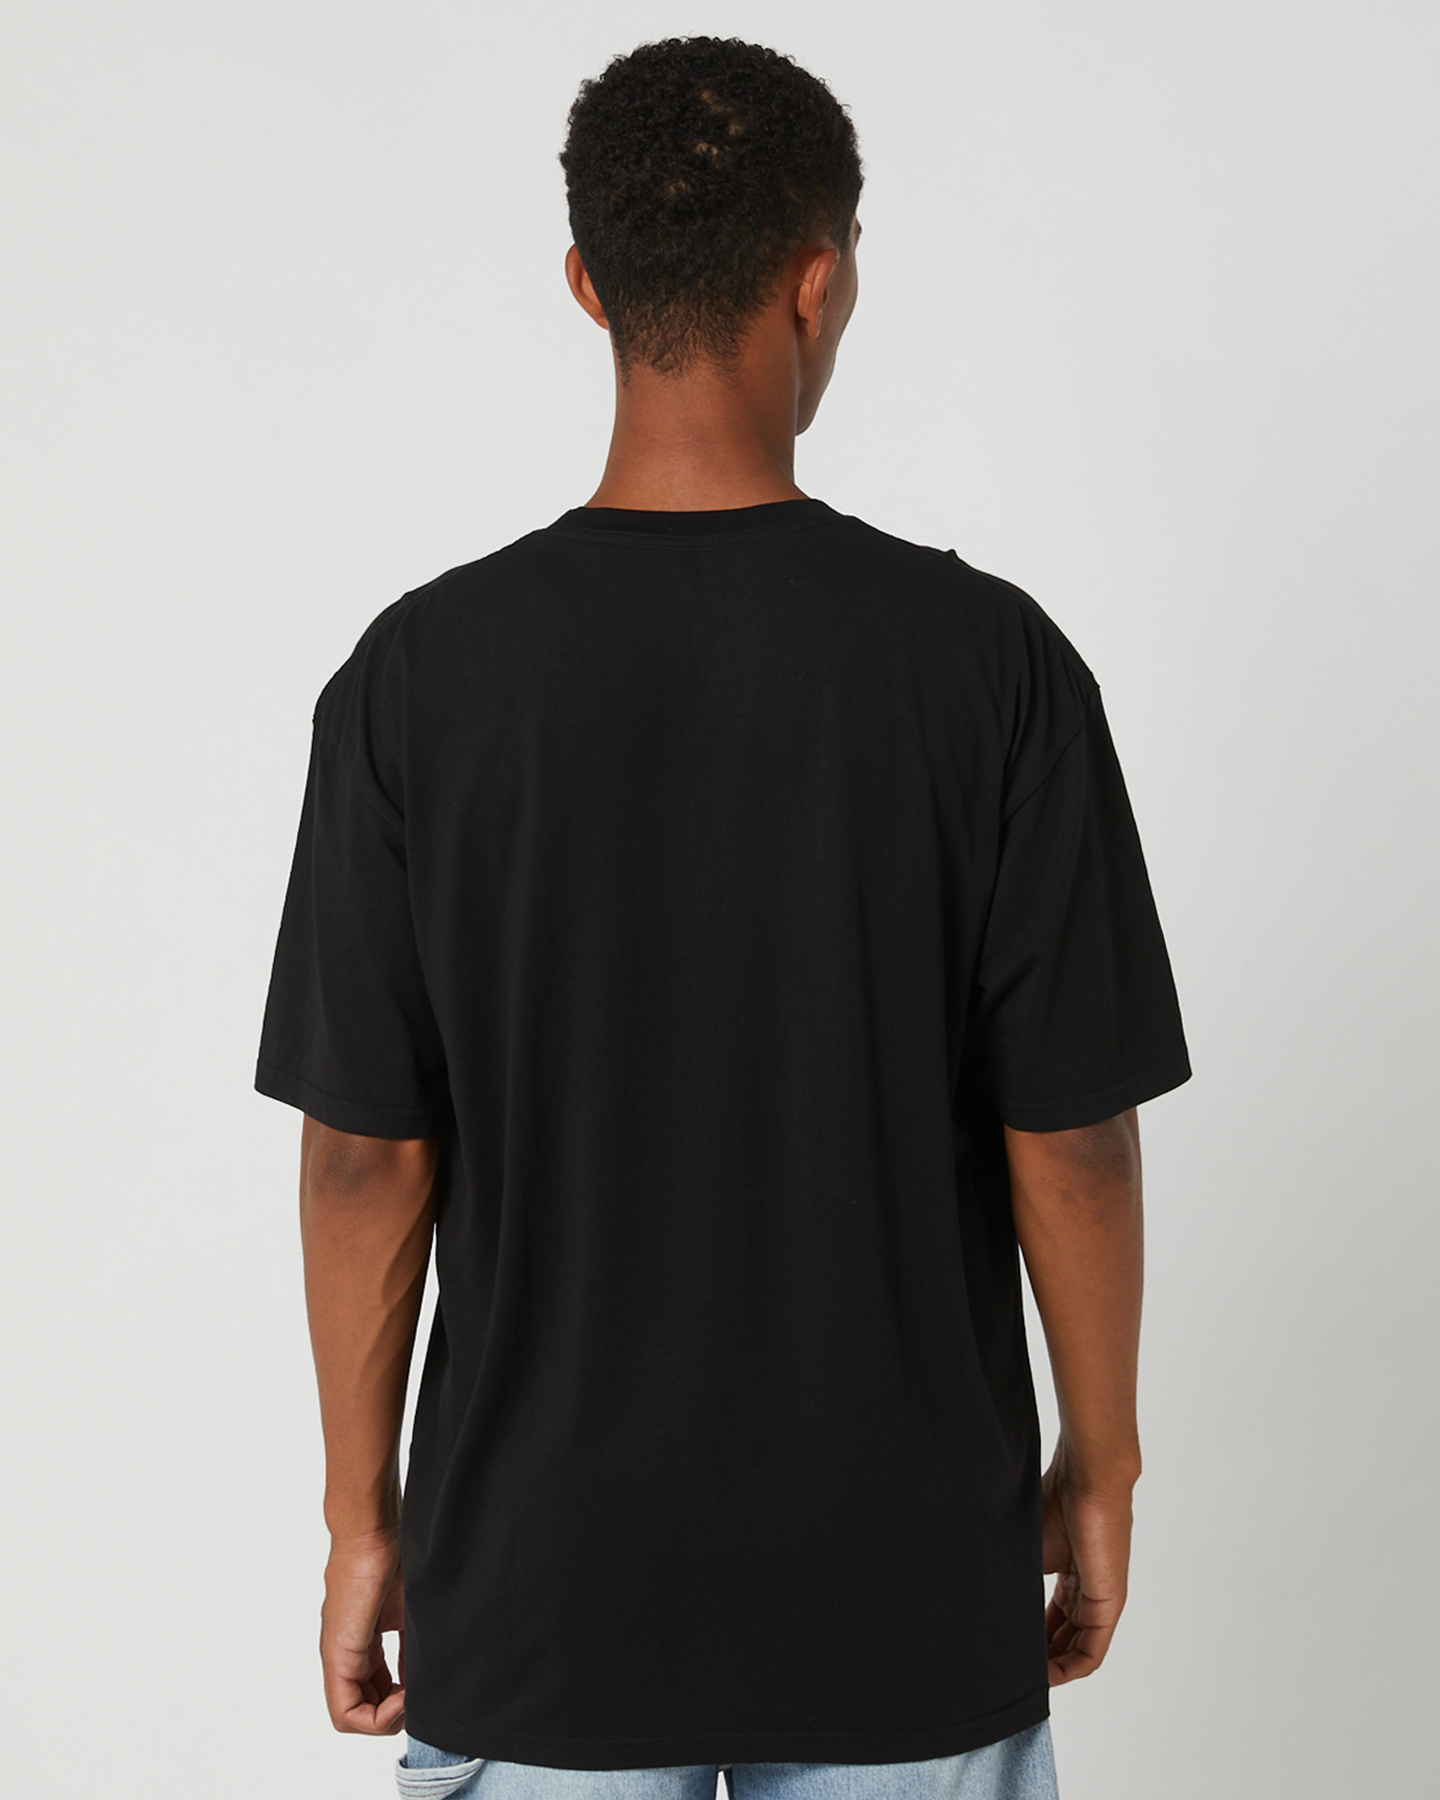 Silent Theory Oversized Tee - Black | SurfStitch